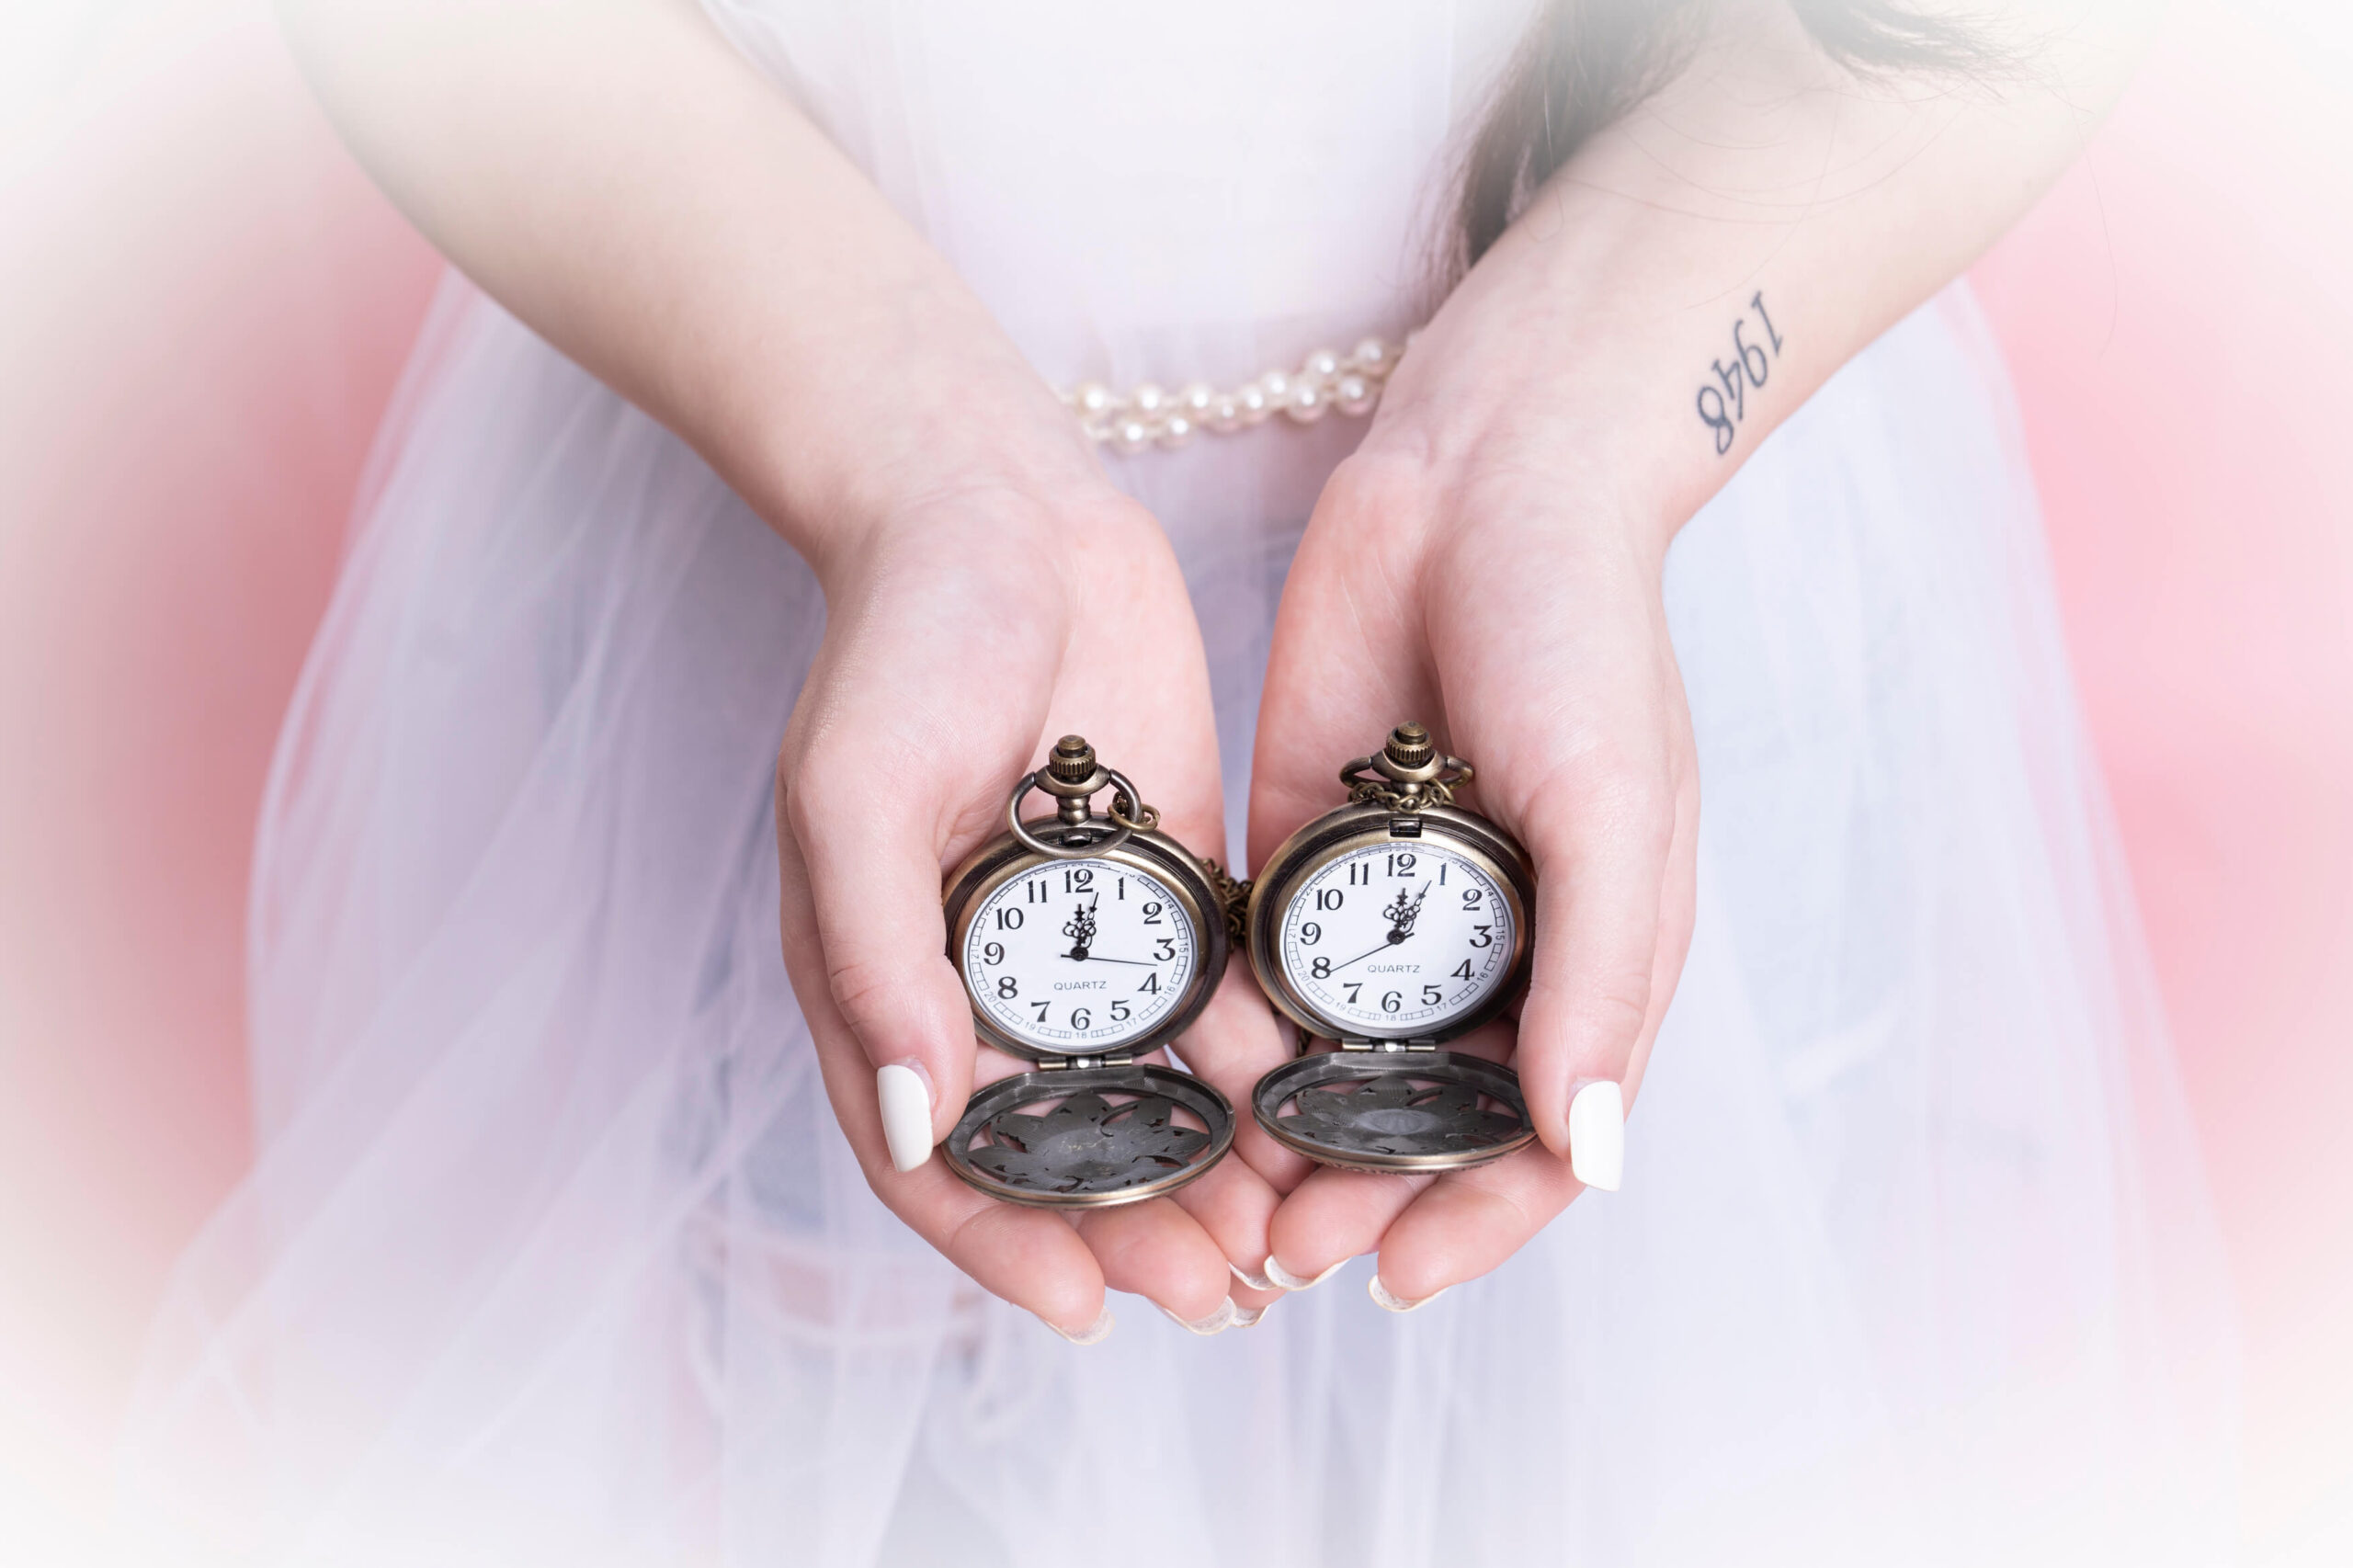 Detail senior photo with watches in hand